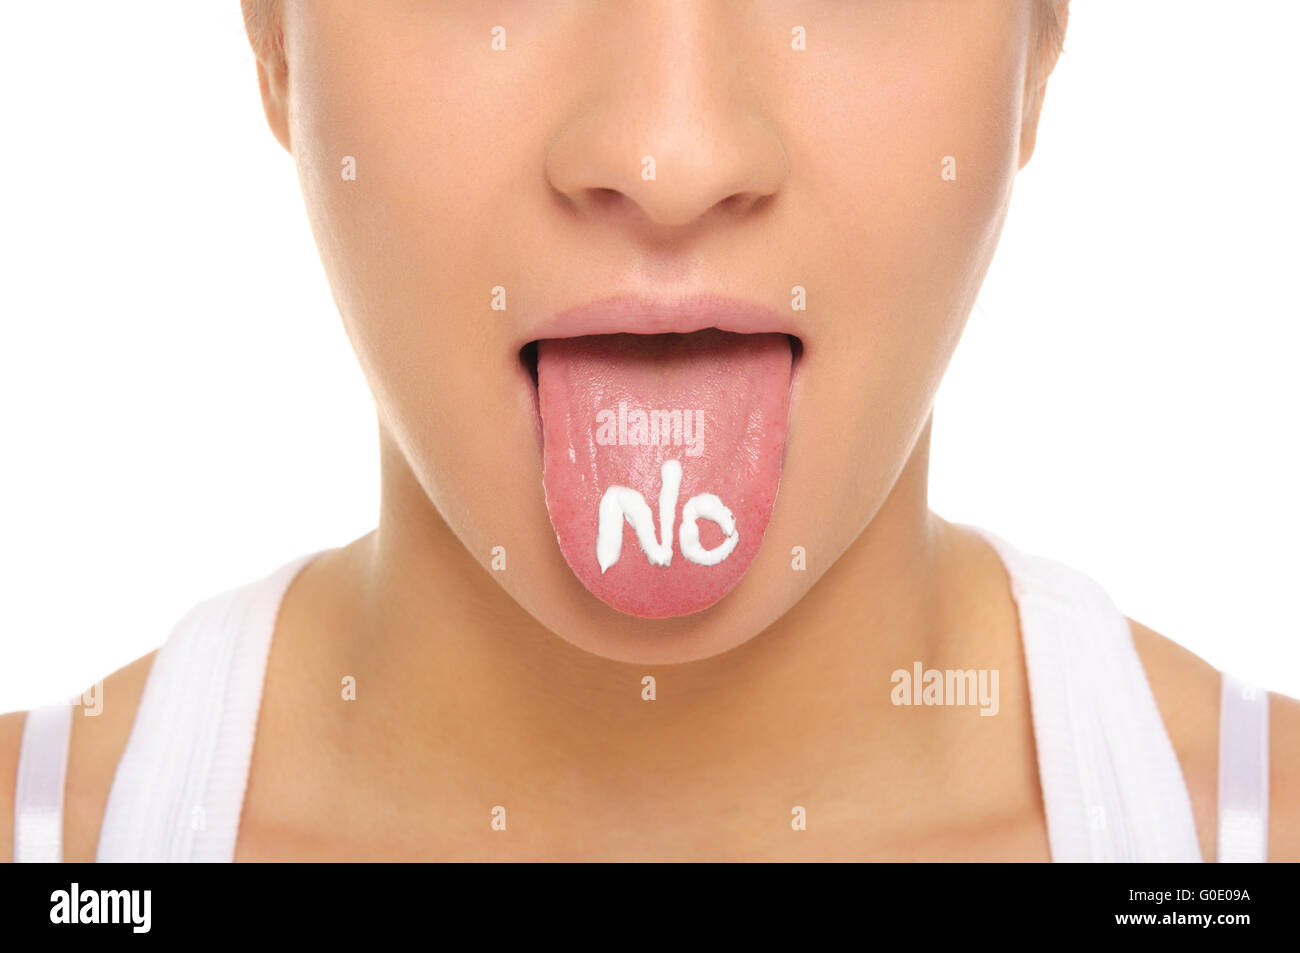 Woman puts out the tongue with an inscription no Stock Photo